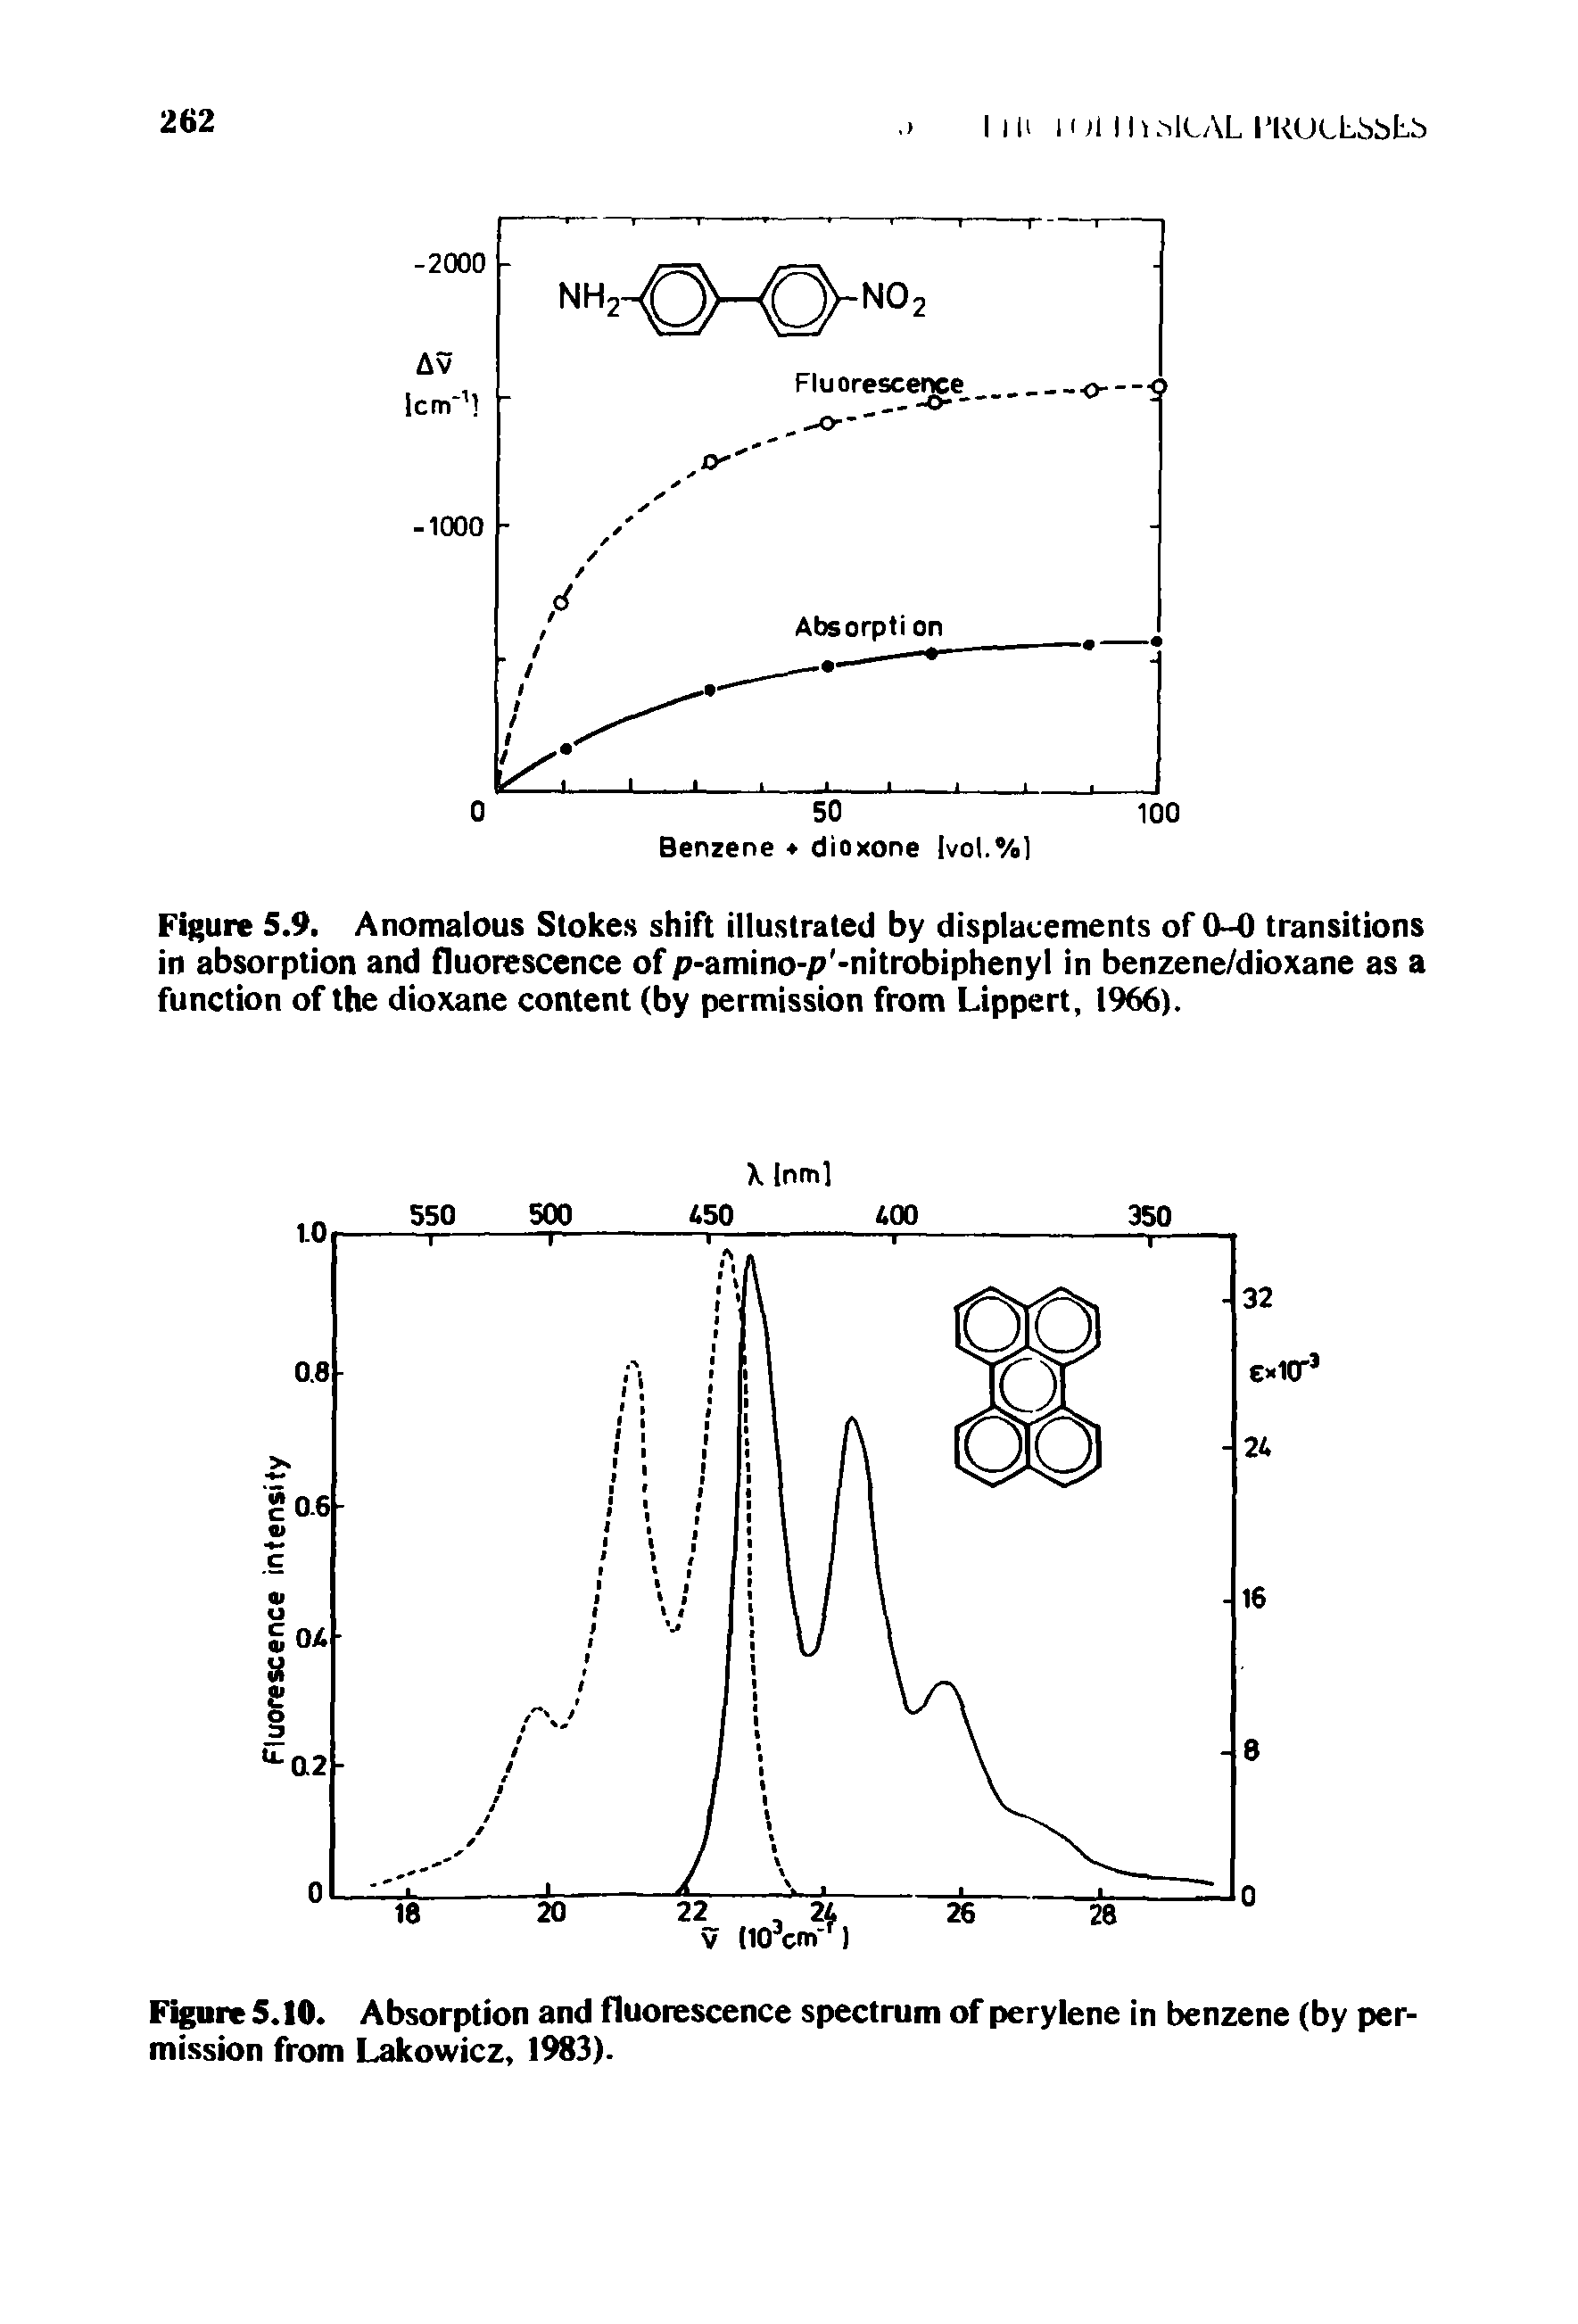 Figure 5.10. Absorption and fluorescence spectrum of perylene in benzene (by permission from Lakowicz, 1983).